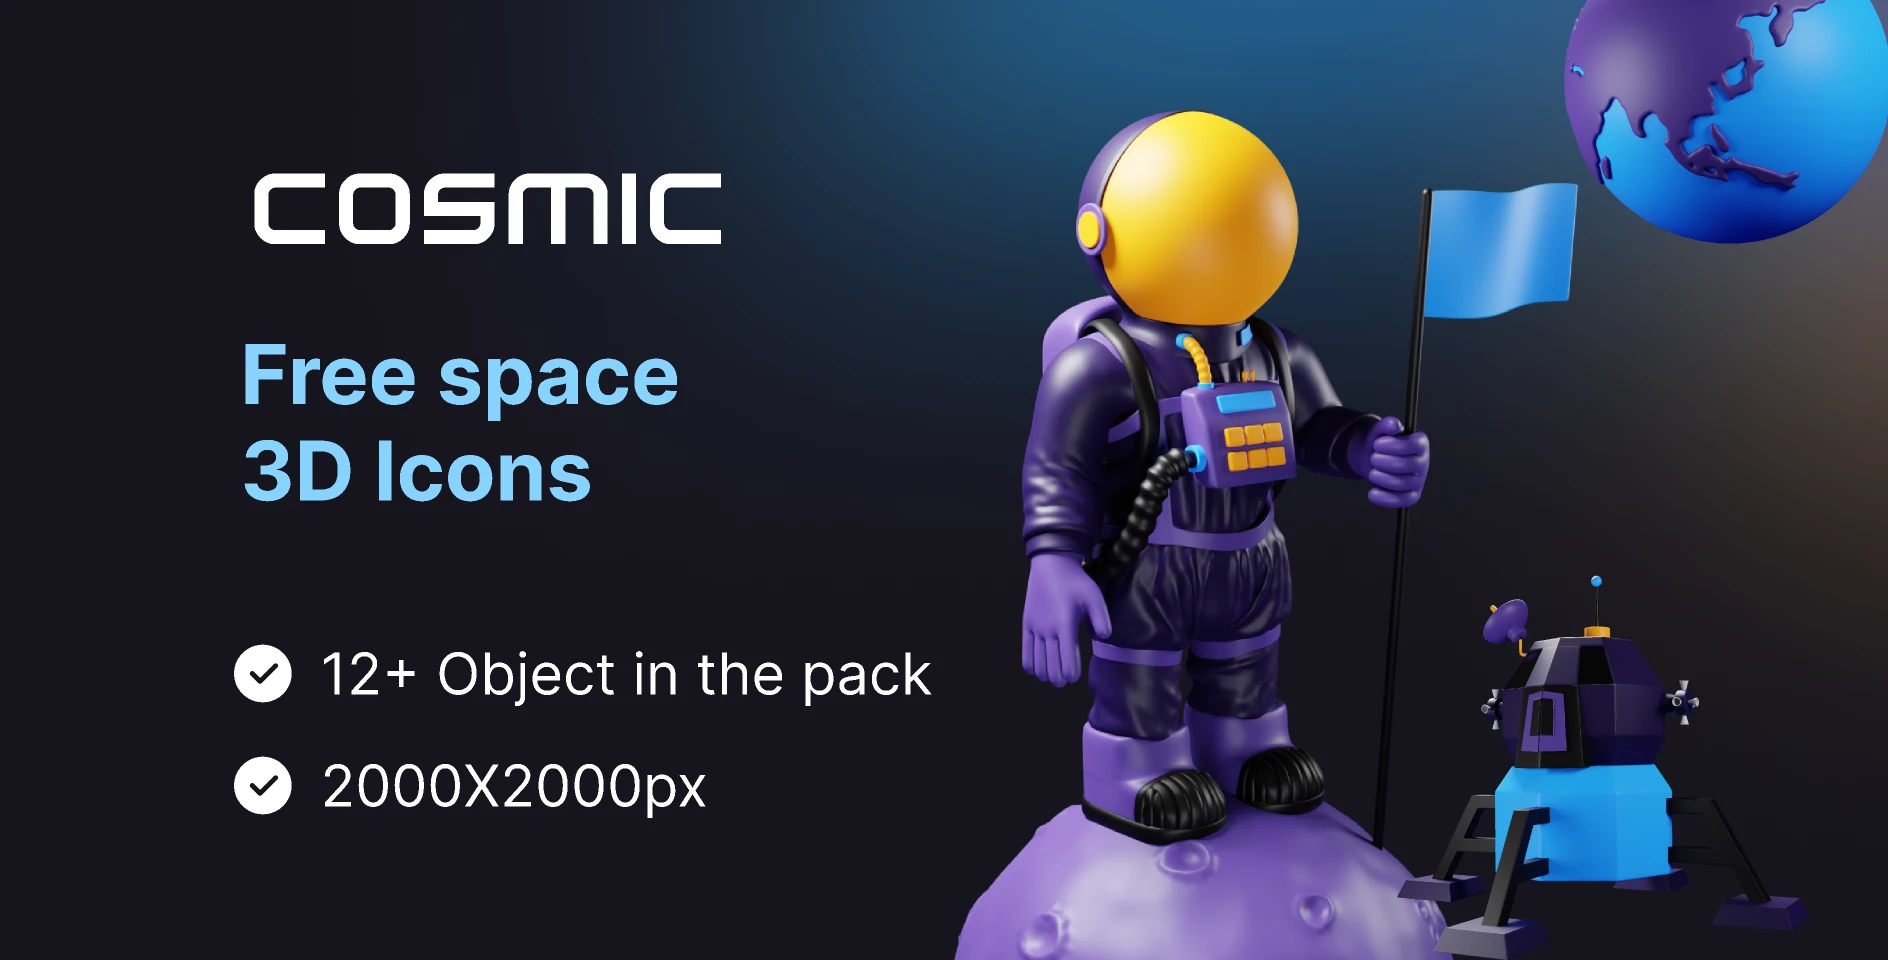 Cosmic  Space Station 3D Model Free for Figma and Adobe XD